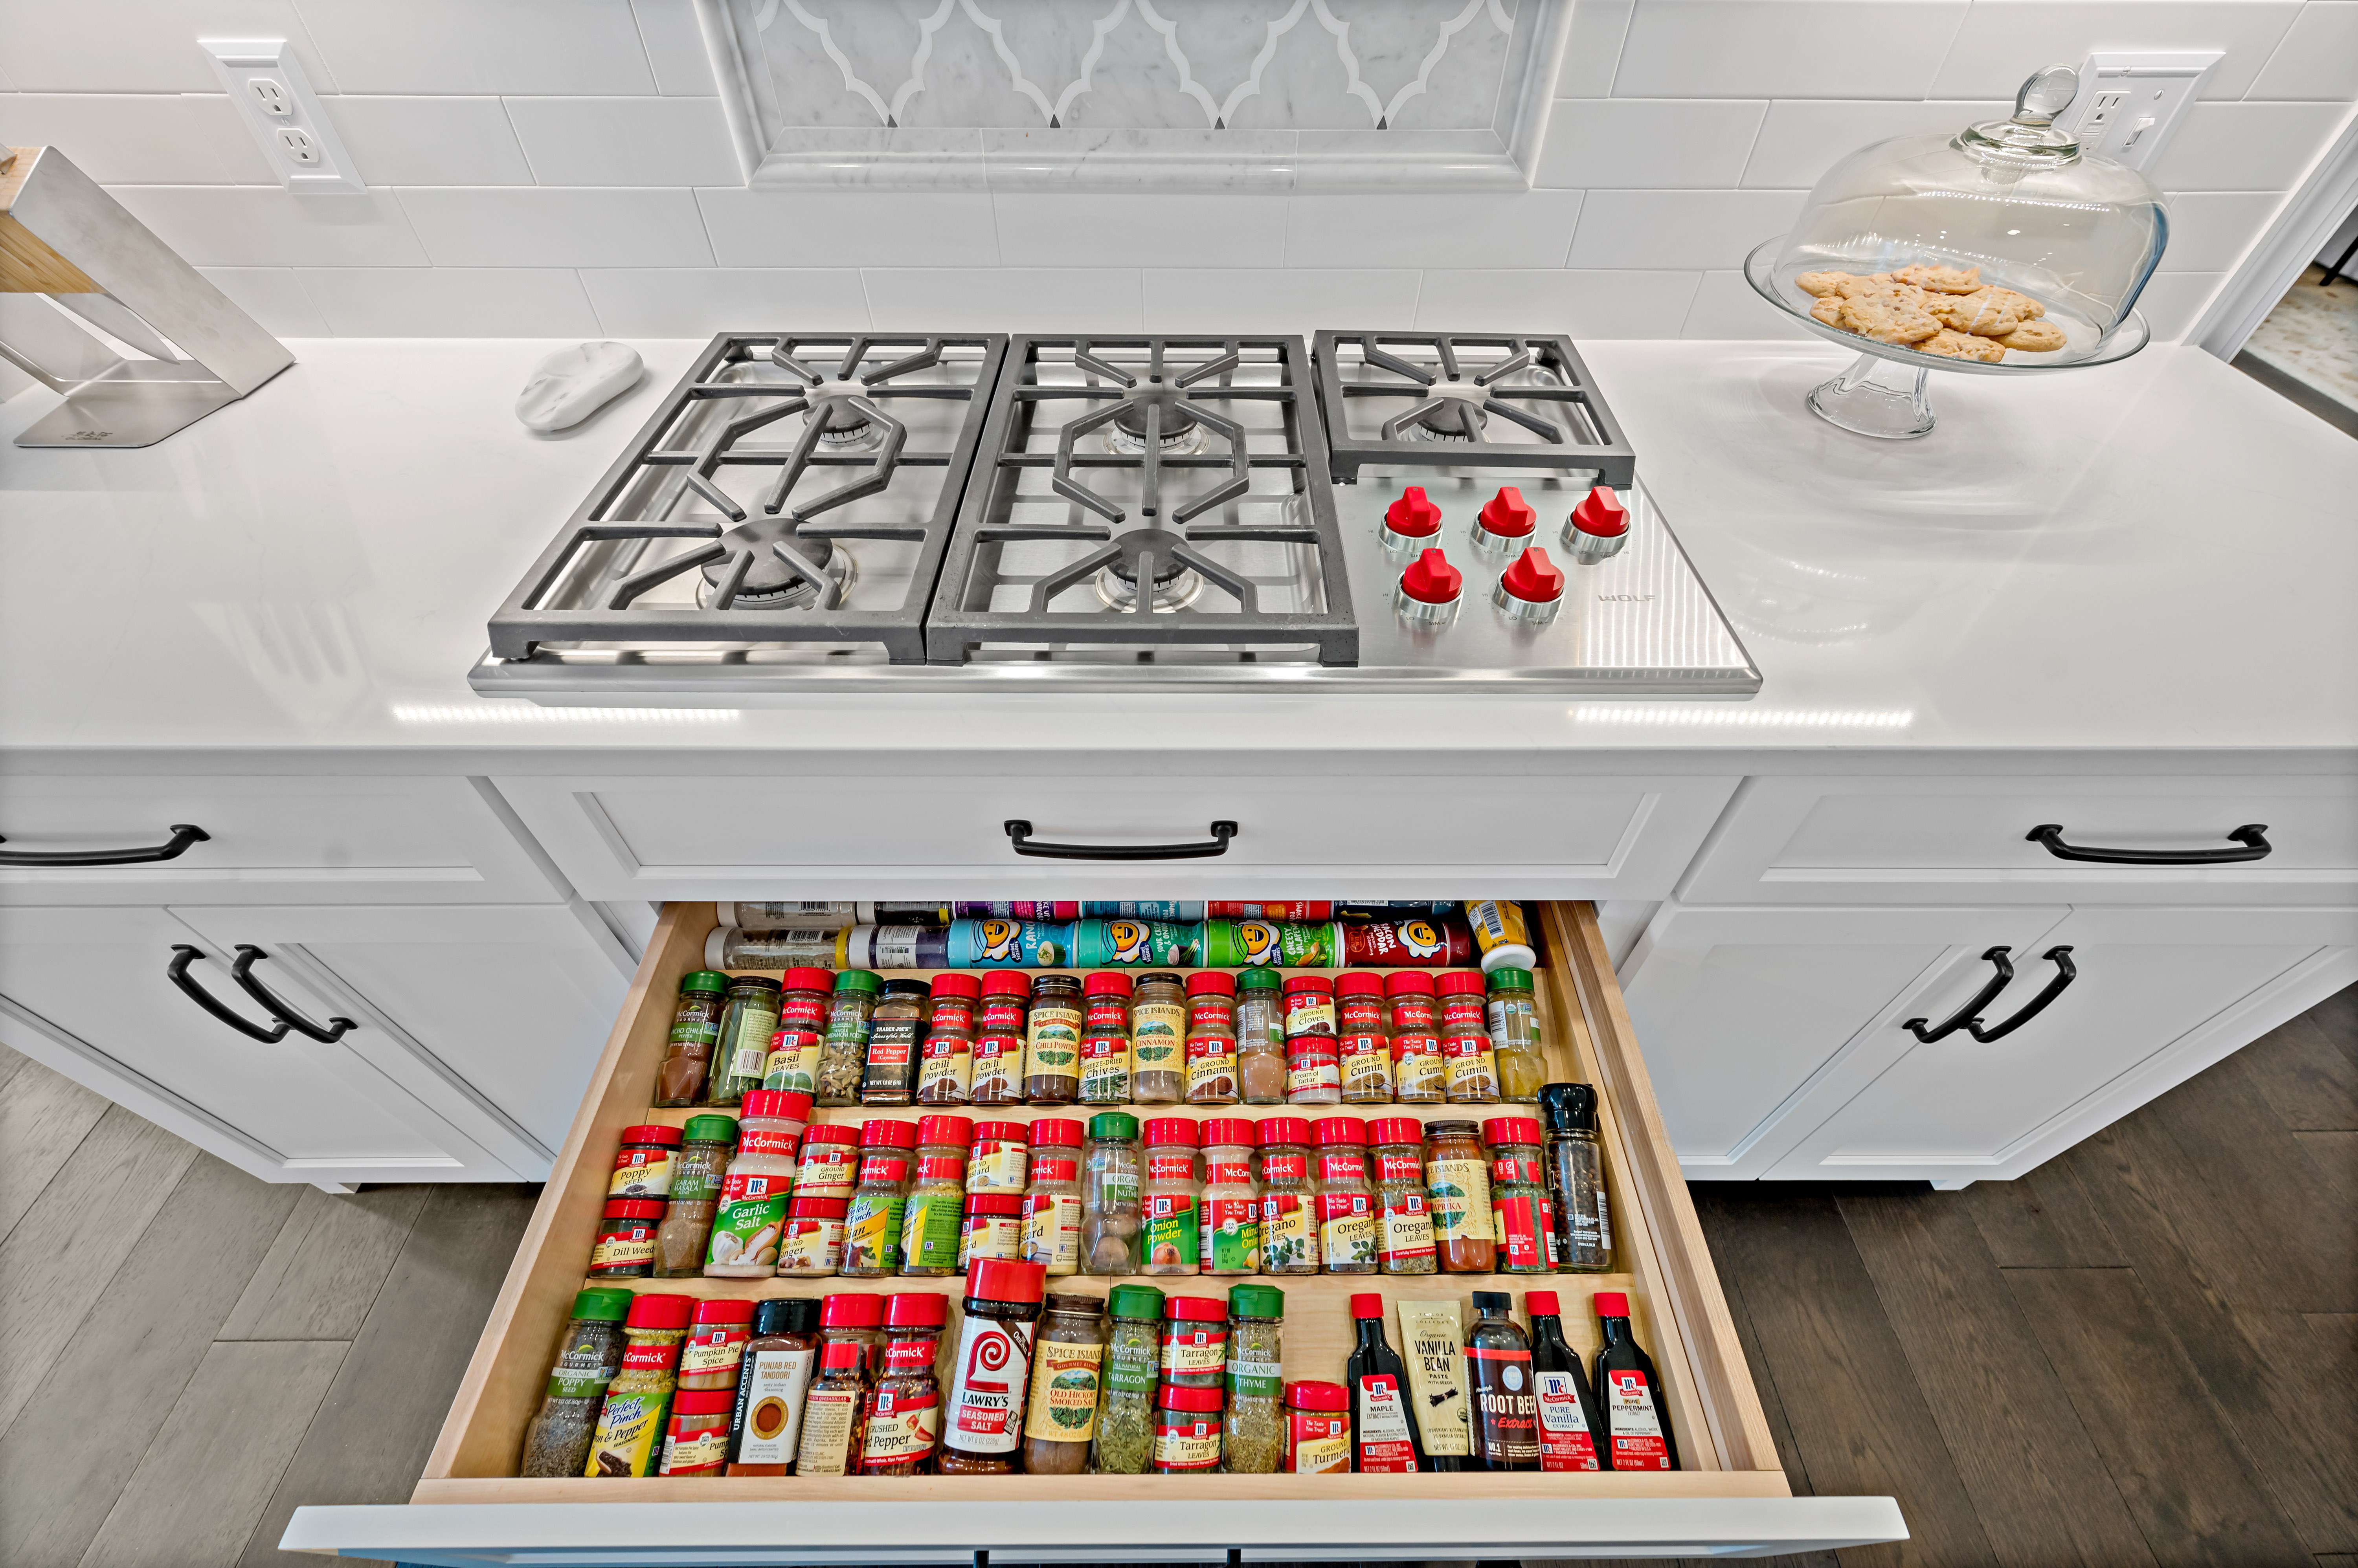 Custom kitchen cabinetry for spices organization near stove